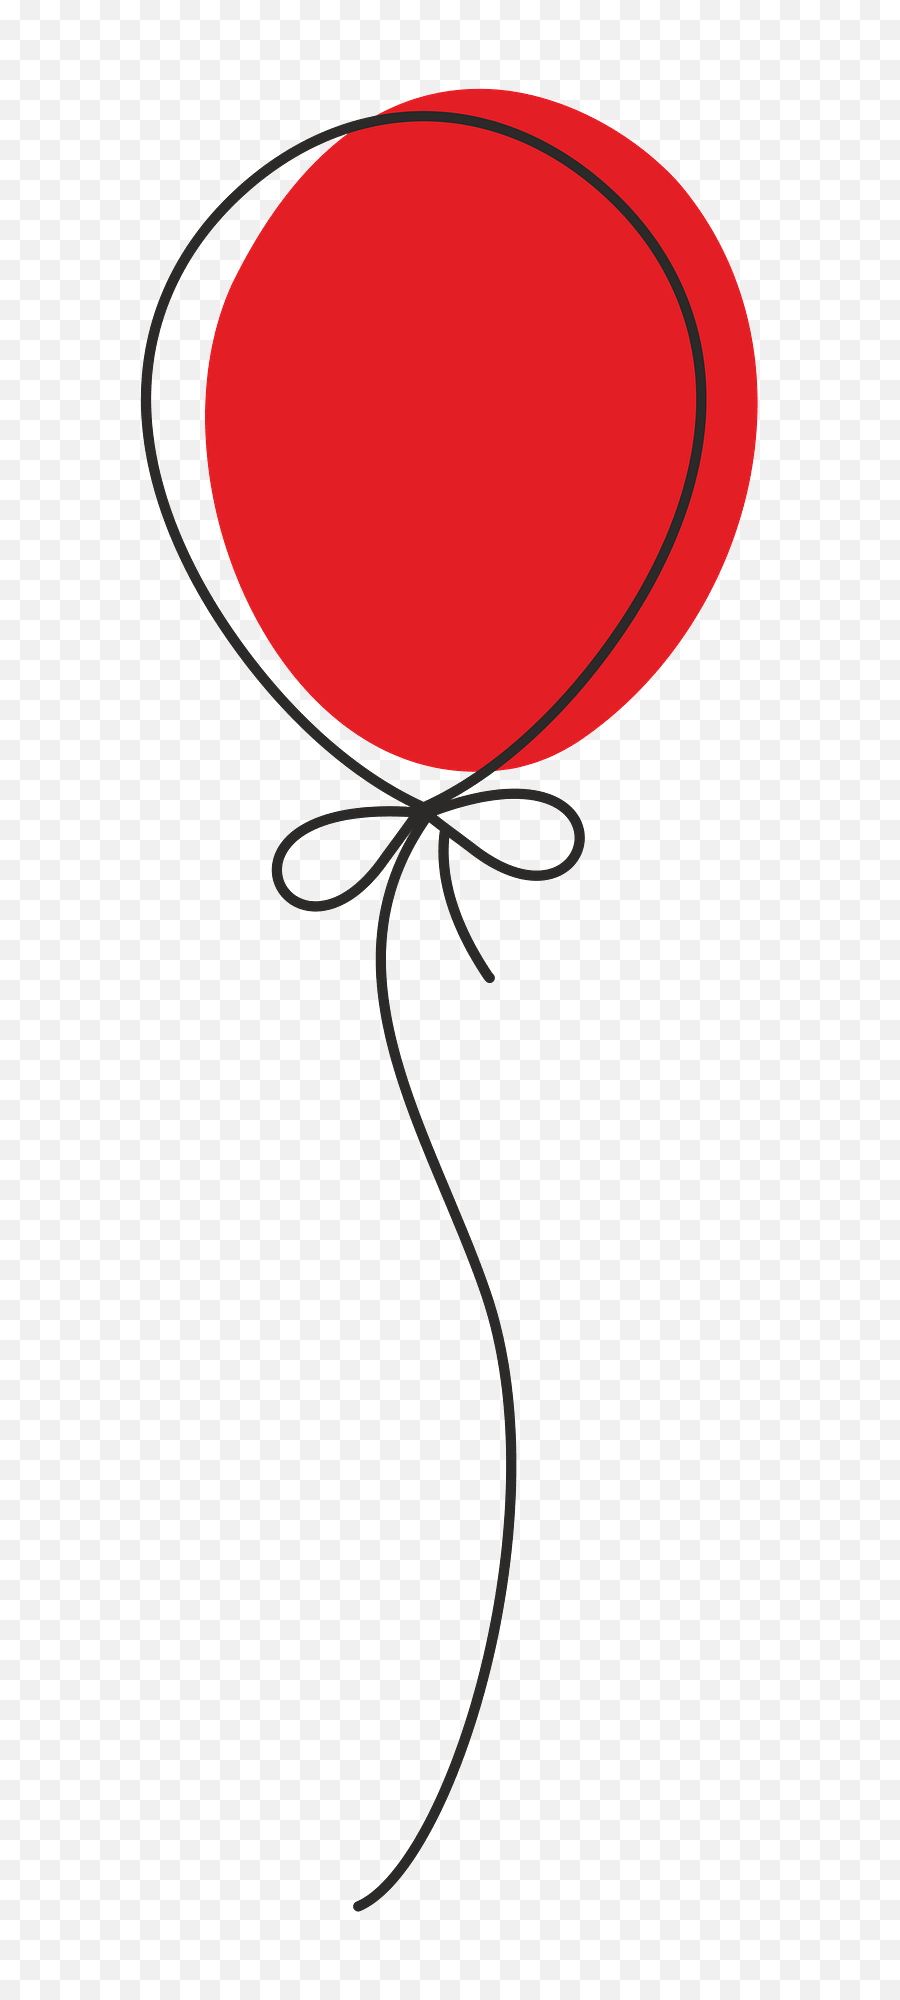 Download Balloon Clipart Hd Png - Uokplrs Bow,Balloons Clipart Transparent